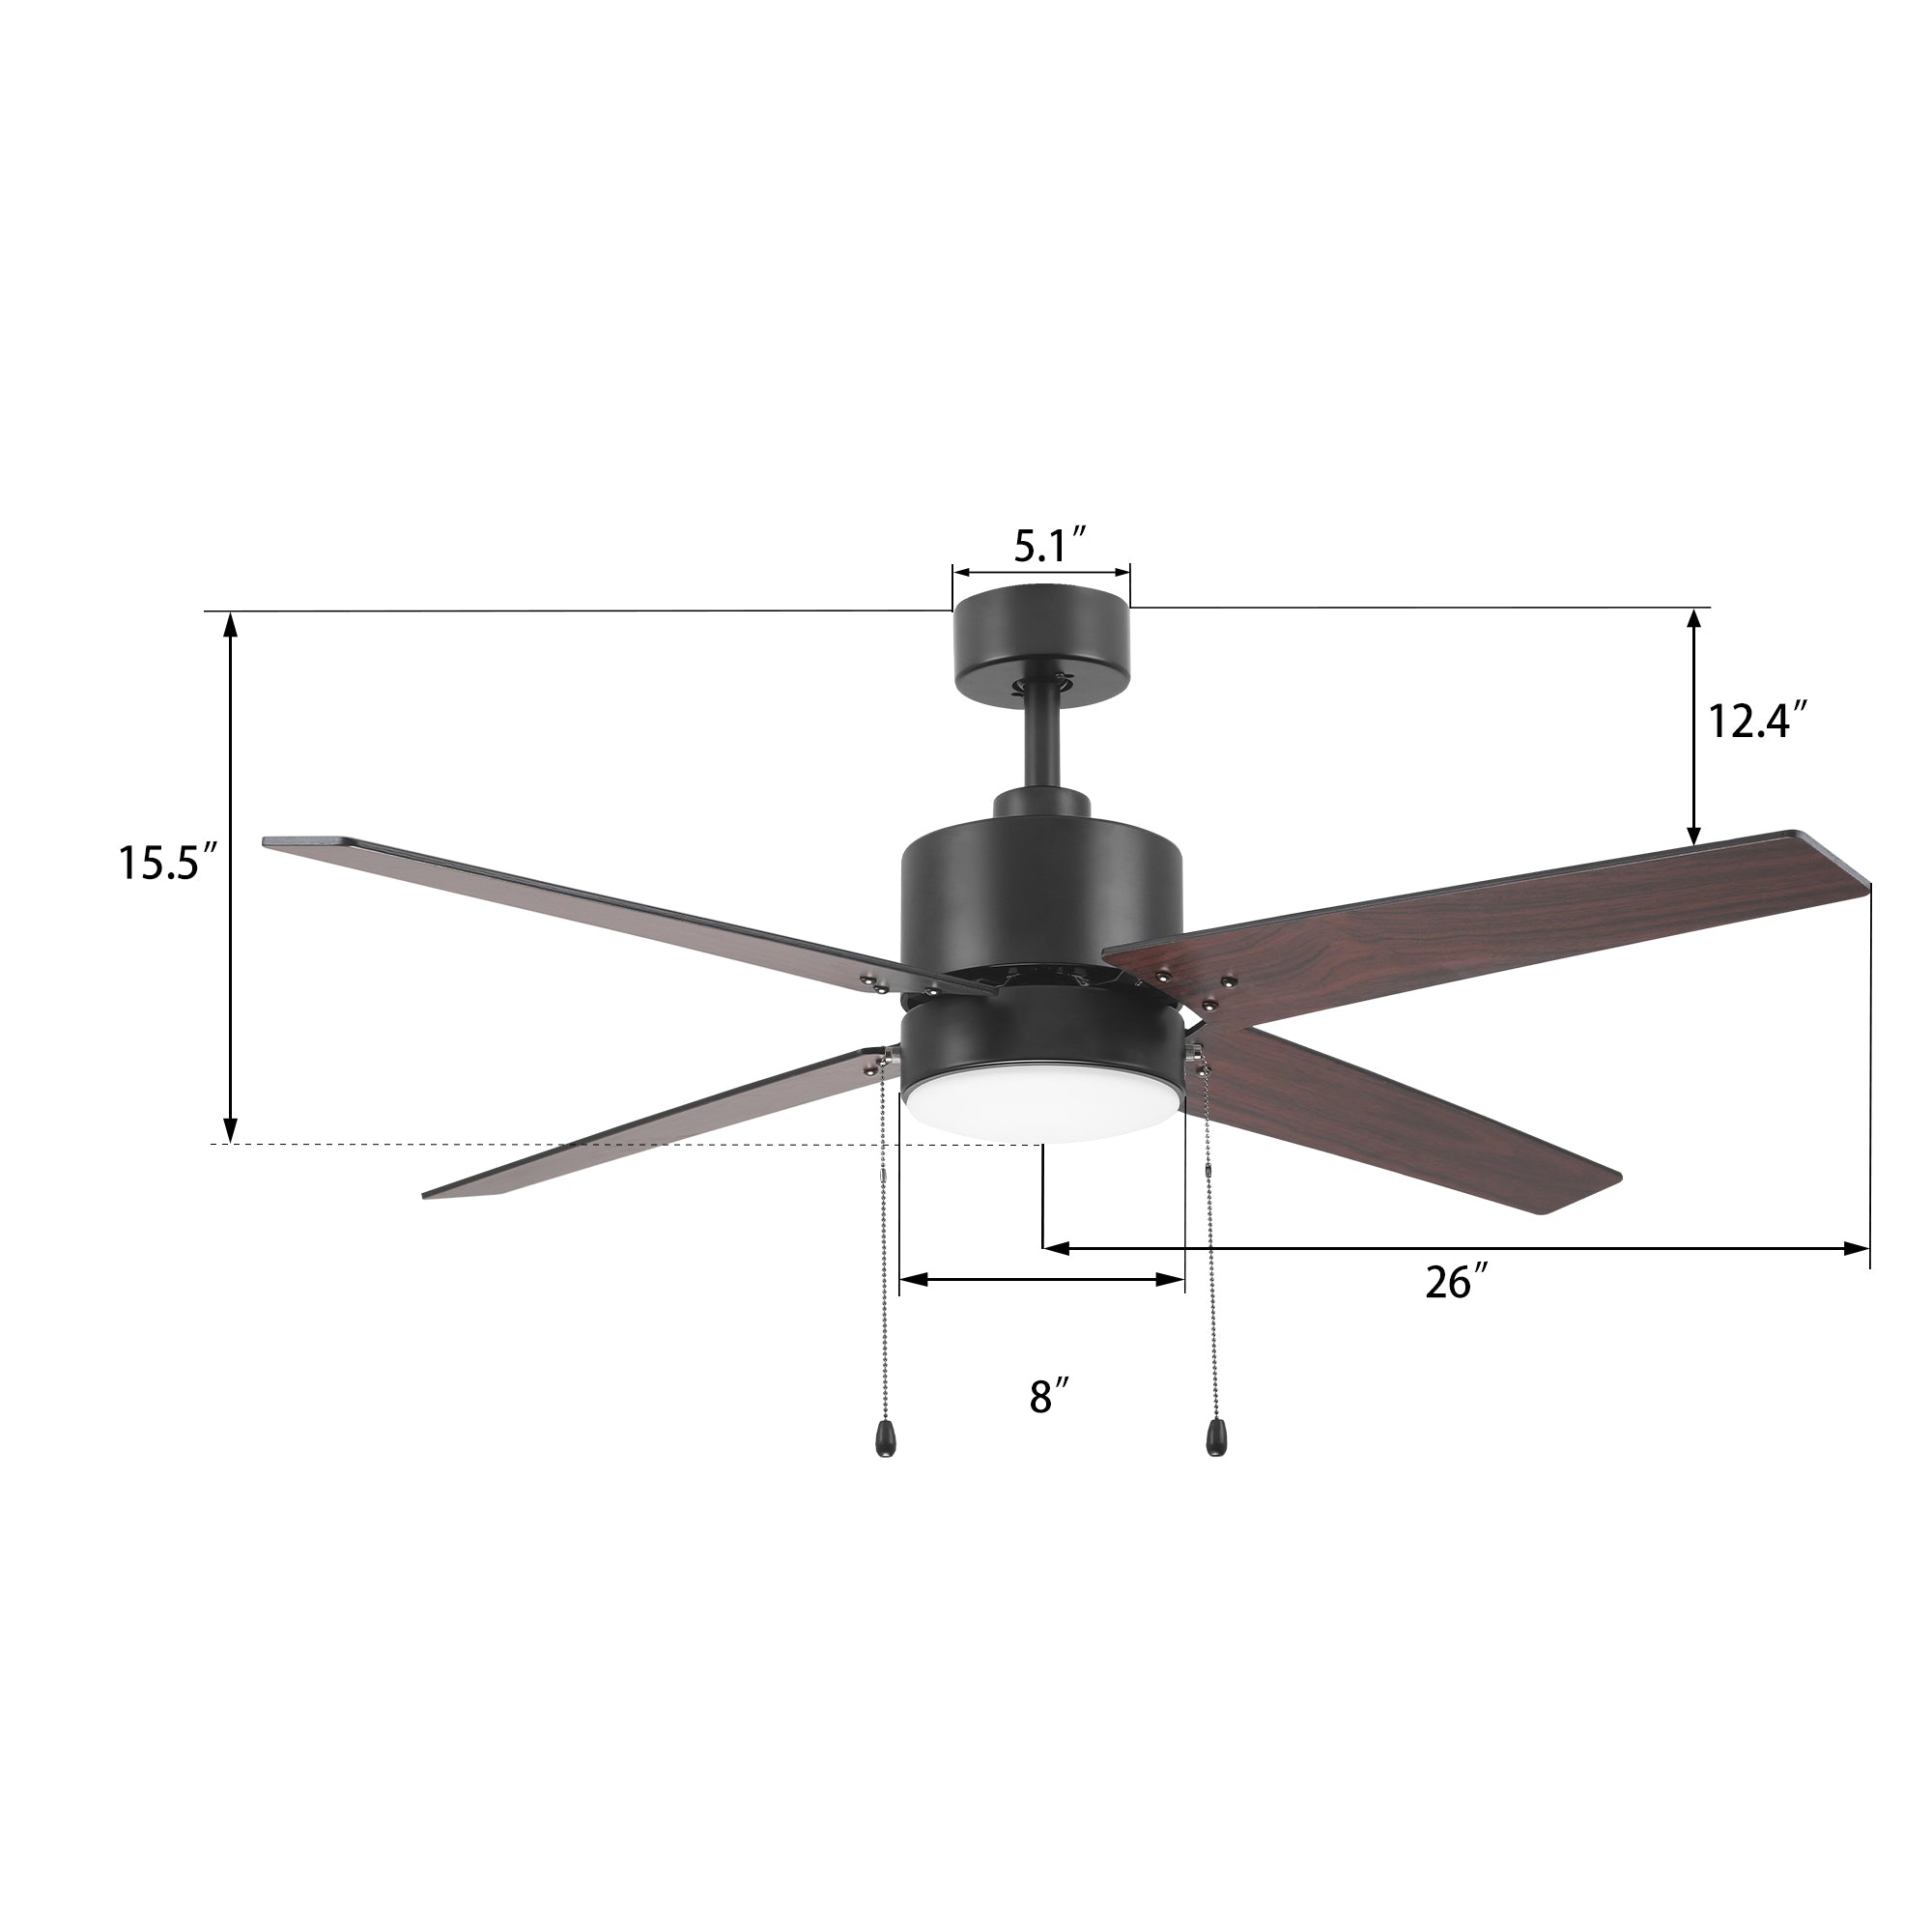 Mabel 52 inch Pull Chain Fan with LED Light